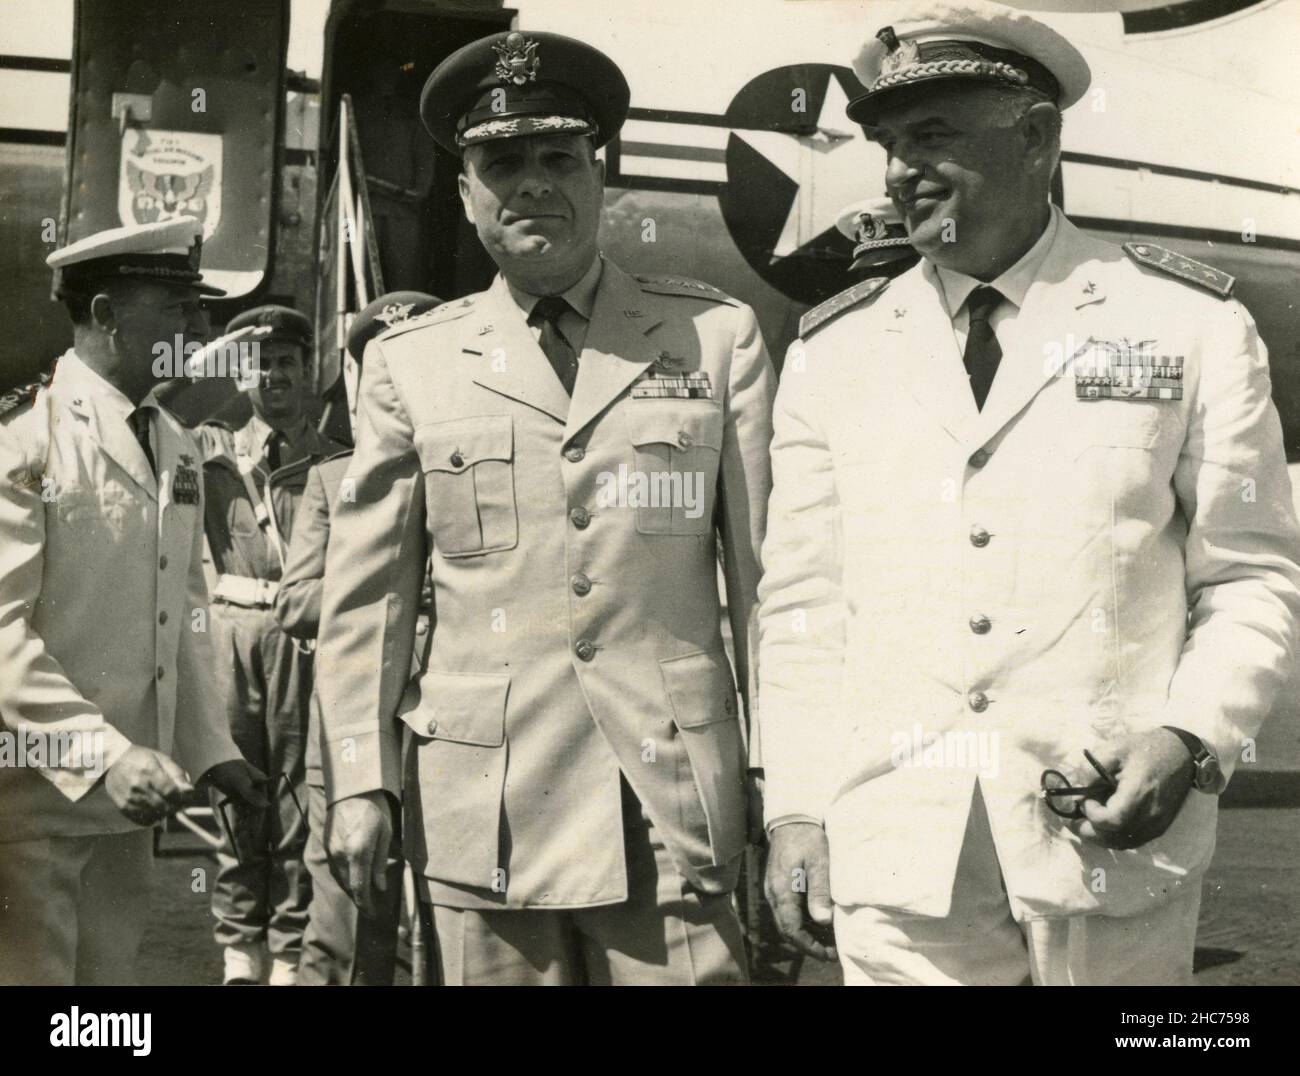 Italians Colonel Musco, Major General Fossati, and US General Cook, Ciampino Air Base, Italy 1952 Stock Photo